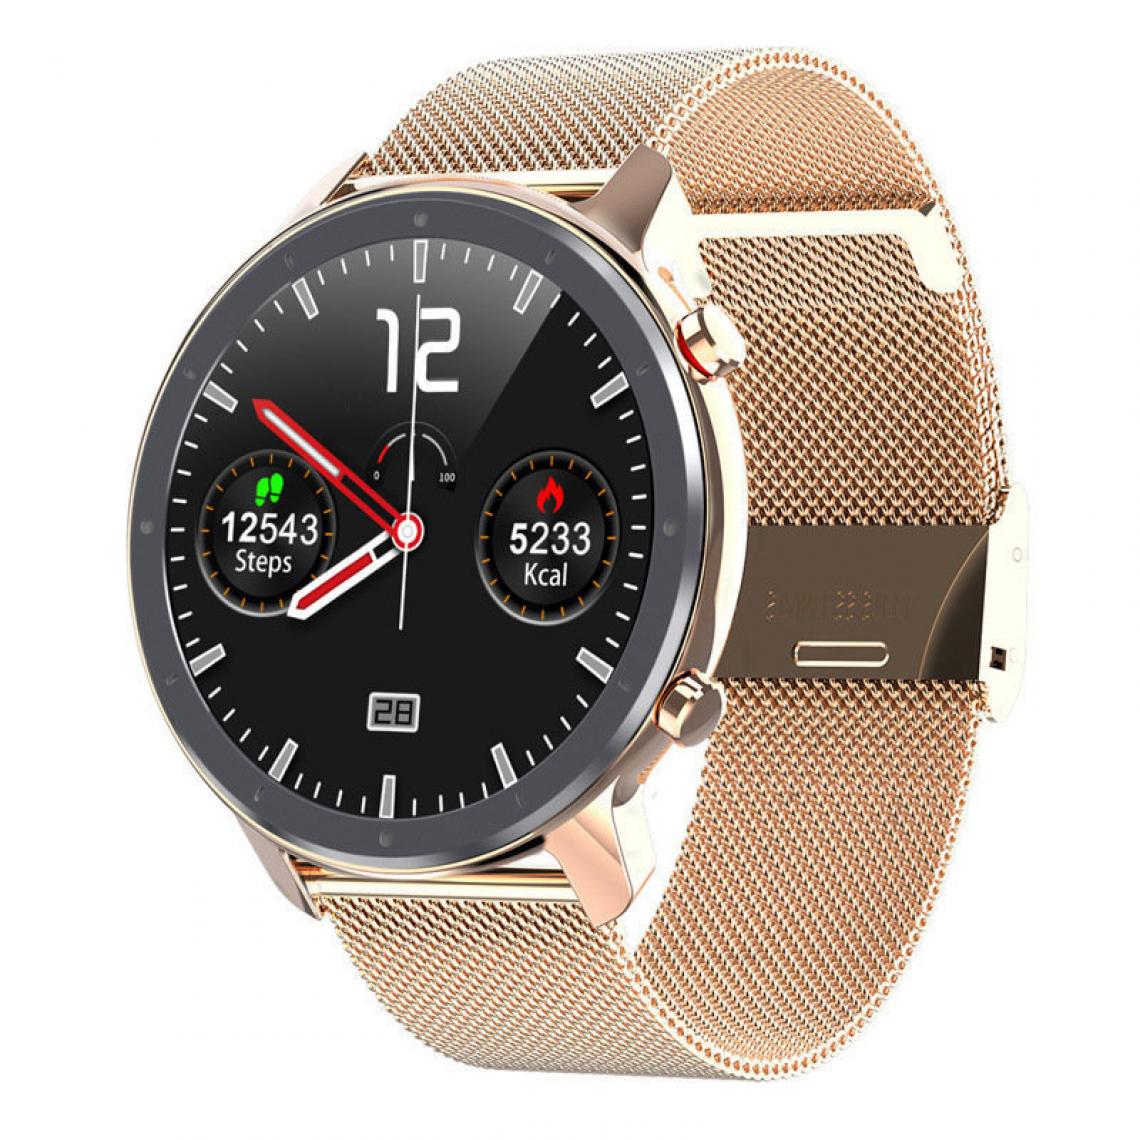 Chronotech Montres - Chronus L11 smartwatch with 1.3inch touch screen, waterproof IP68, activity tracker, sports, pedometer(gold) - Montre connectée